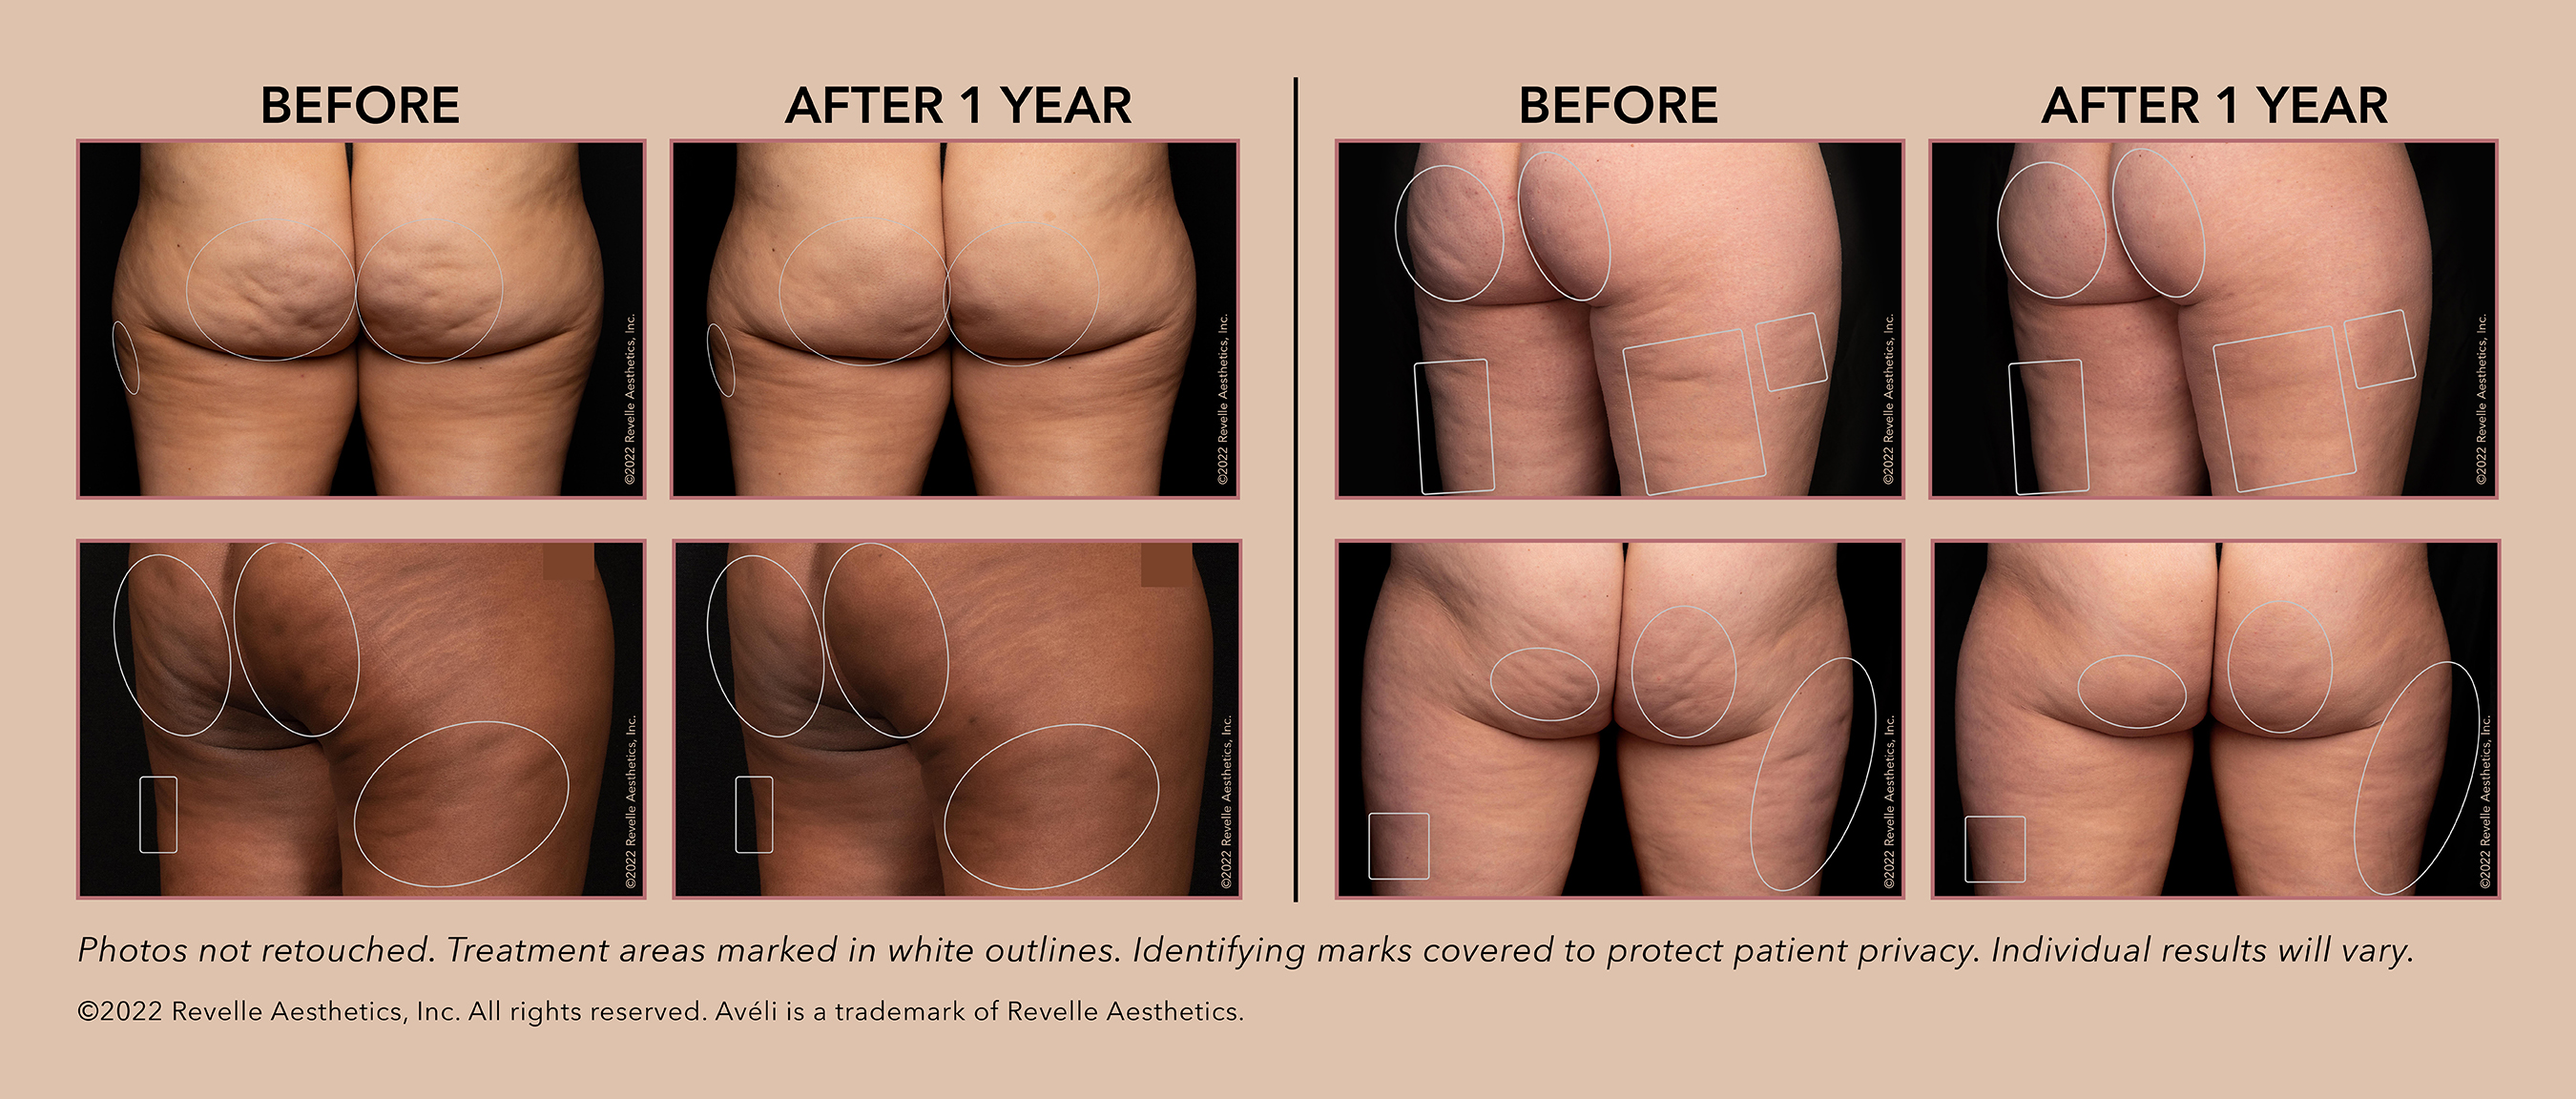 Aveli(tm) delivers long-lasting cellulite reduction in the buttocks and thighs after a single procedure. After photos demonstrate durable results at one year post procedure. Photos not retouched. Treatment areas marked in white outlines. Individual results will vary.